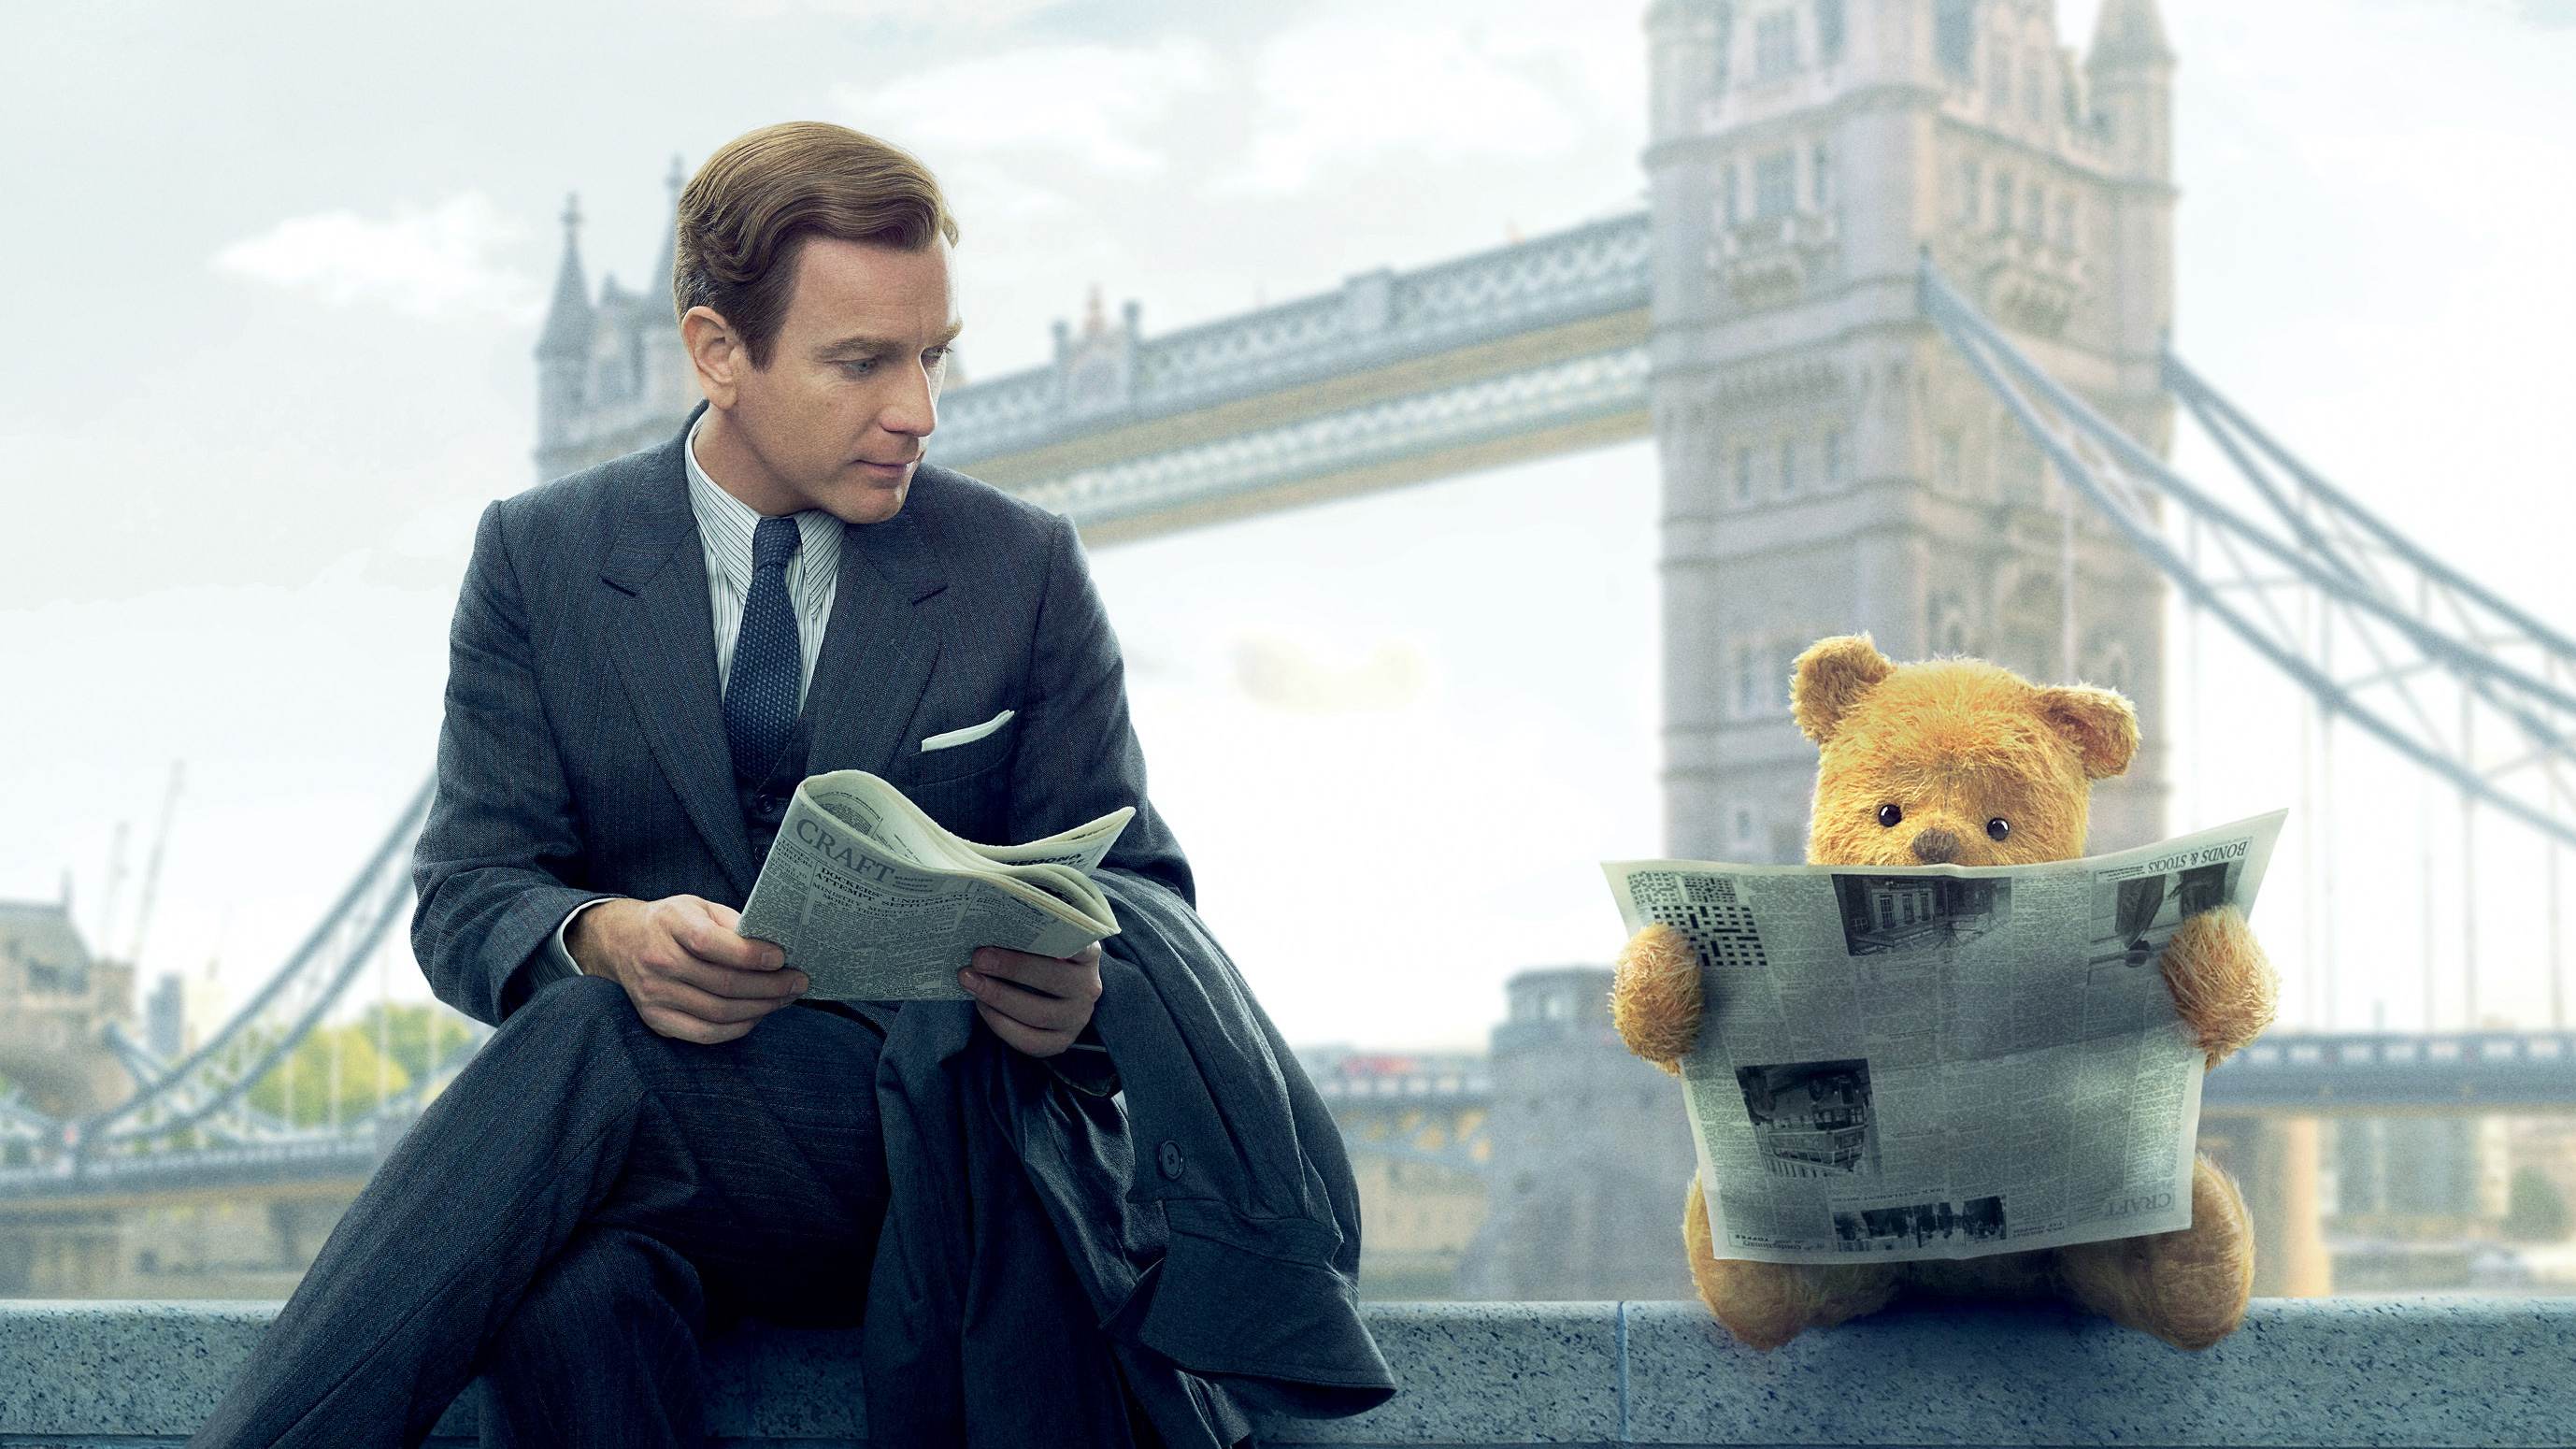 Christopher Robin 2018 Movie Poster, HD Movies, 4k Wallpapers, Images